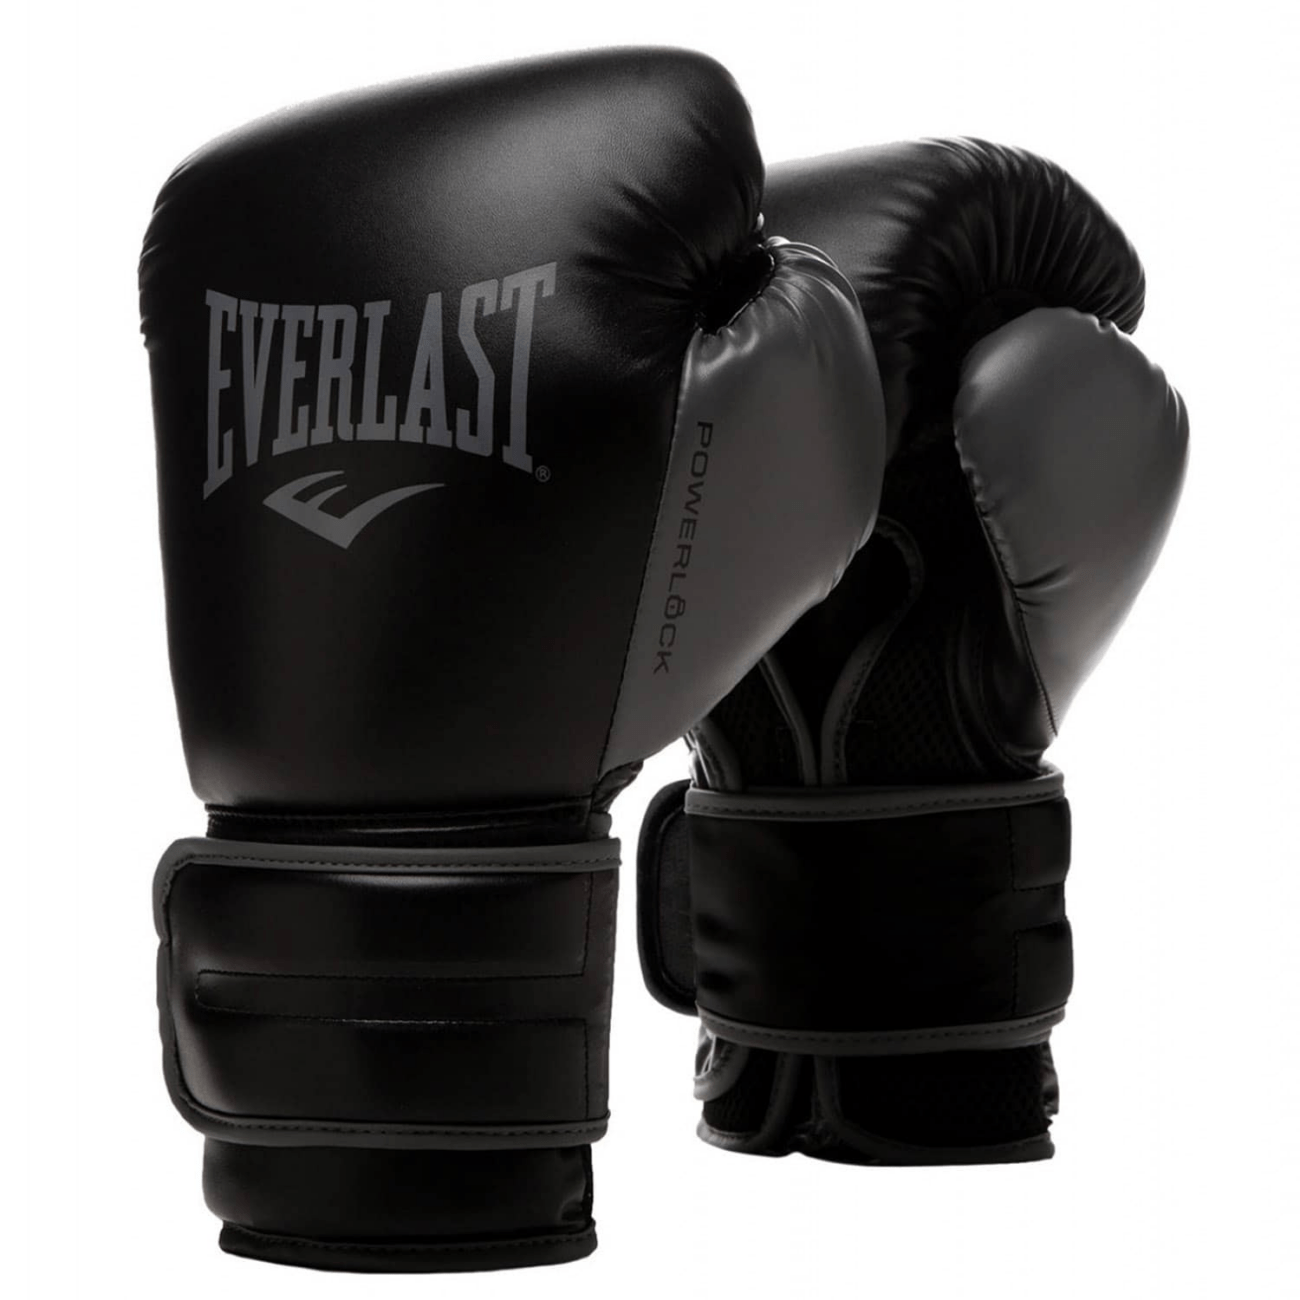 Boxing Equipment - Boxing gloves